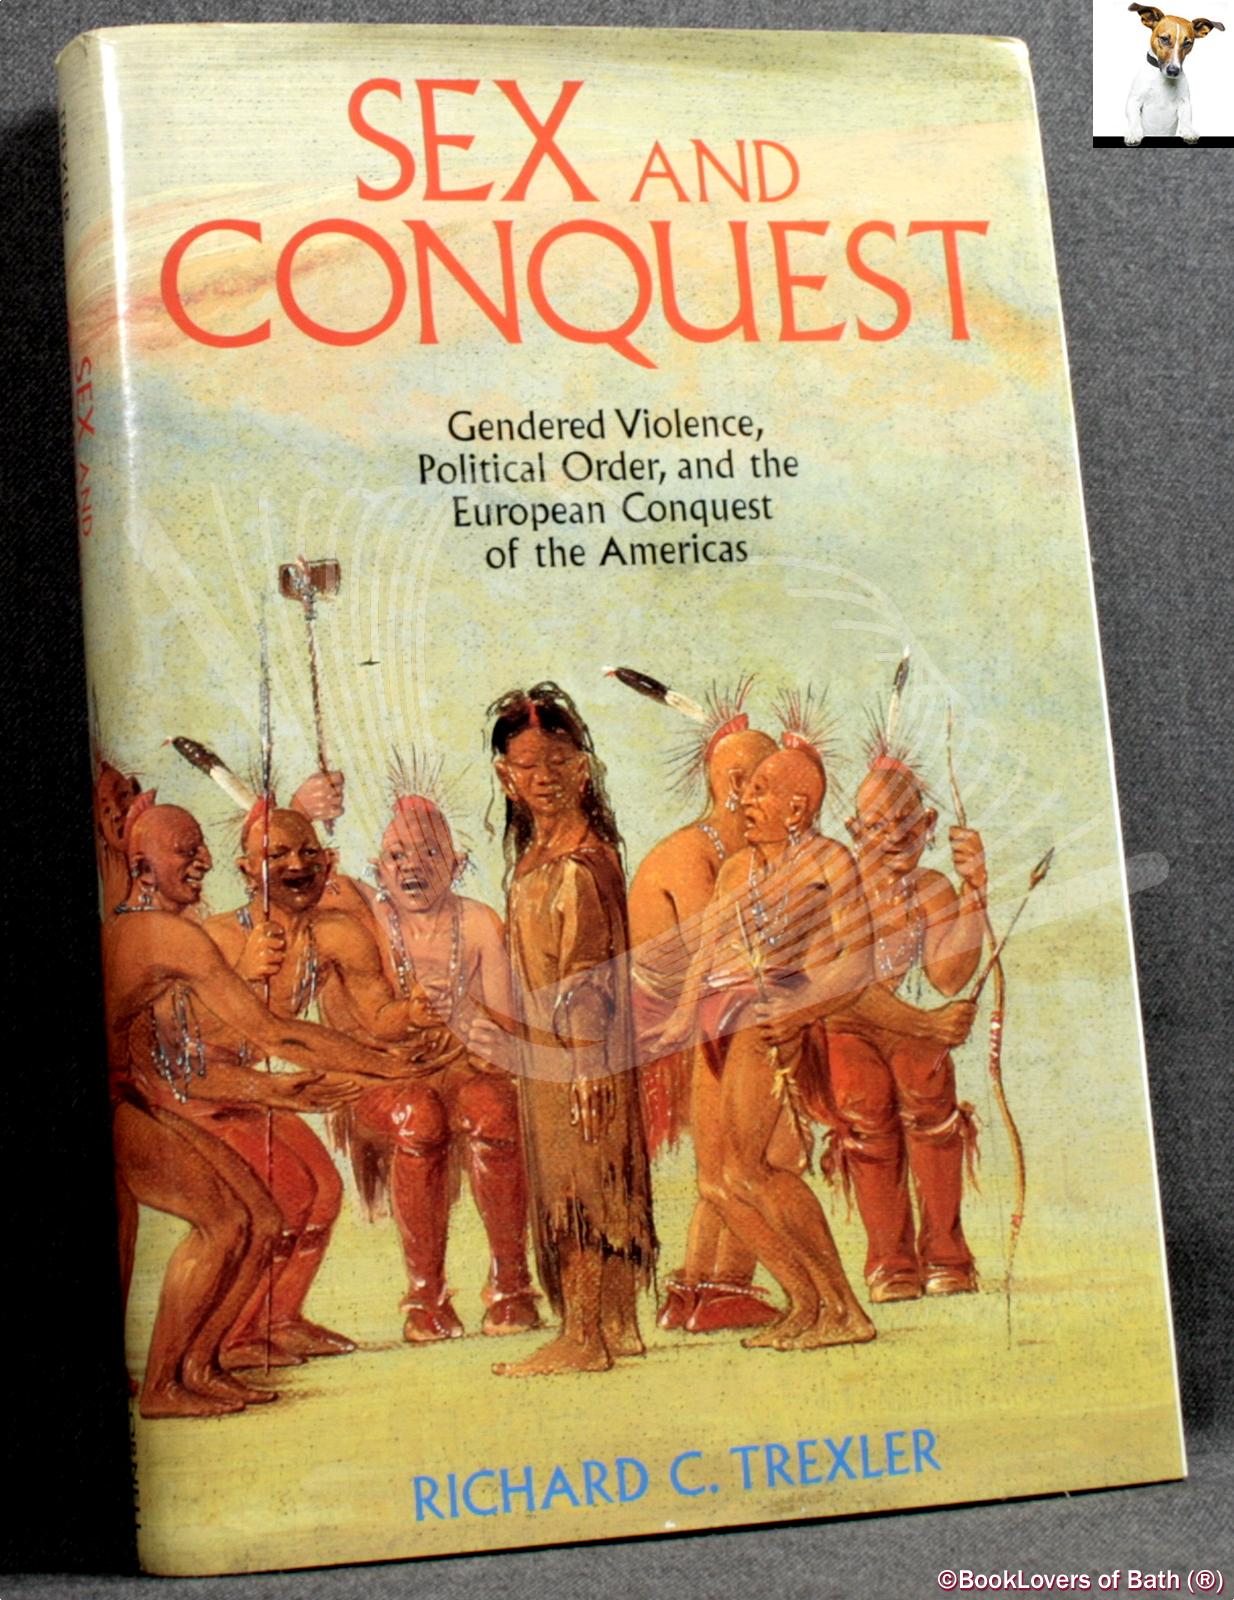 Sex and Conquest: Gendered Violence, Political Order, and The European Conquest of the Americas - Richard C. Trexler